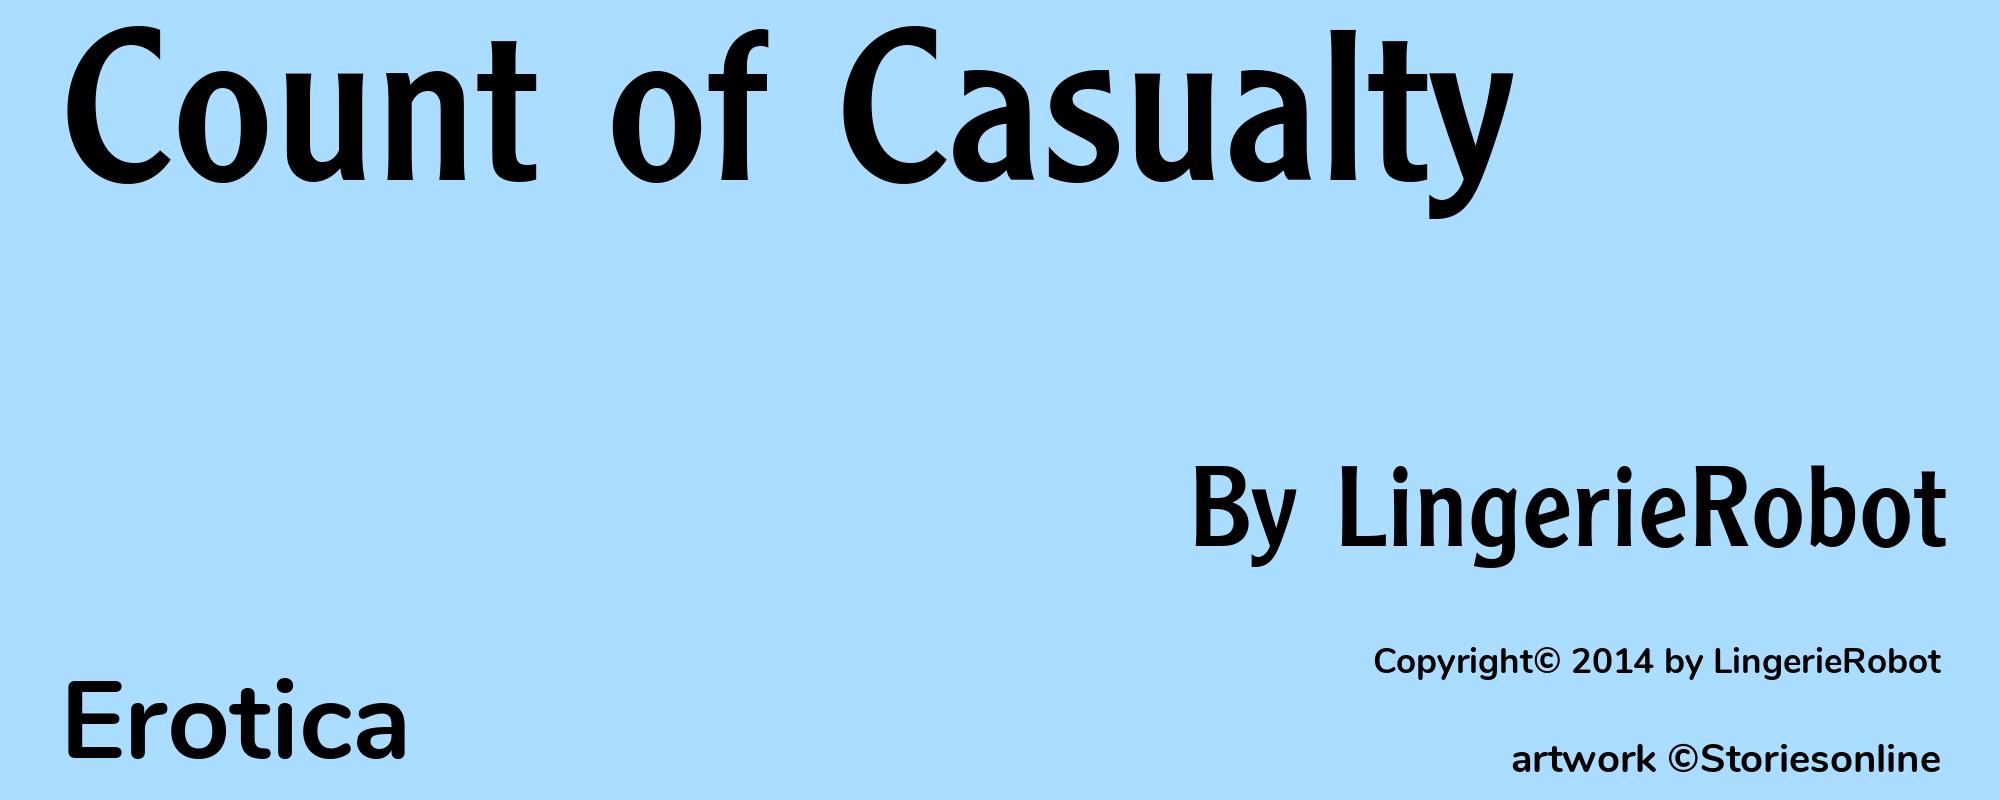 Count of Casualty - Cover